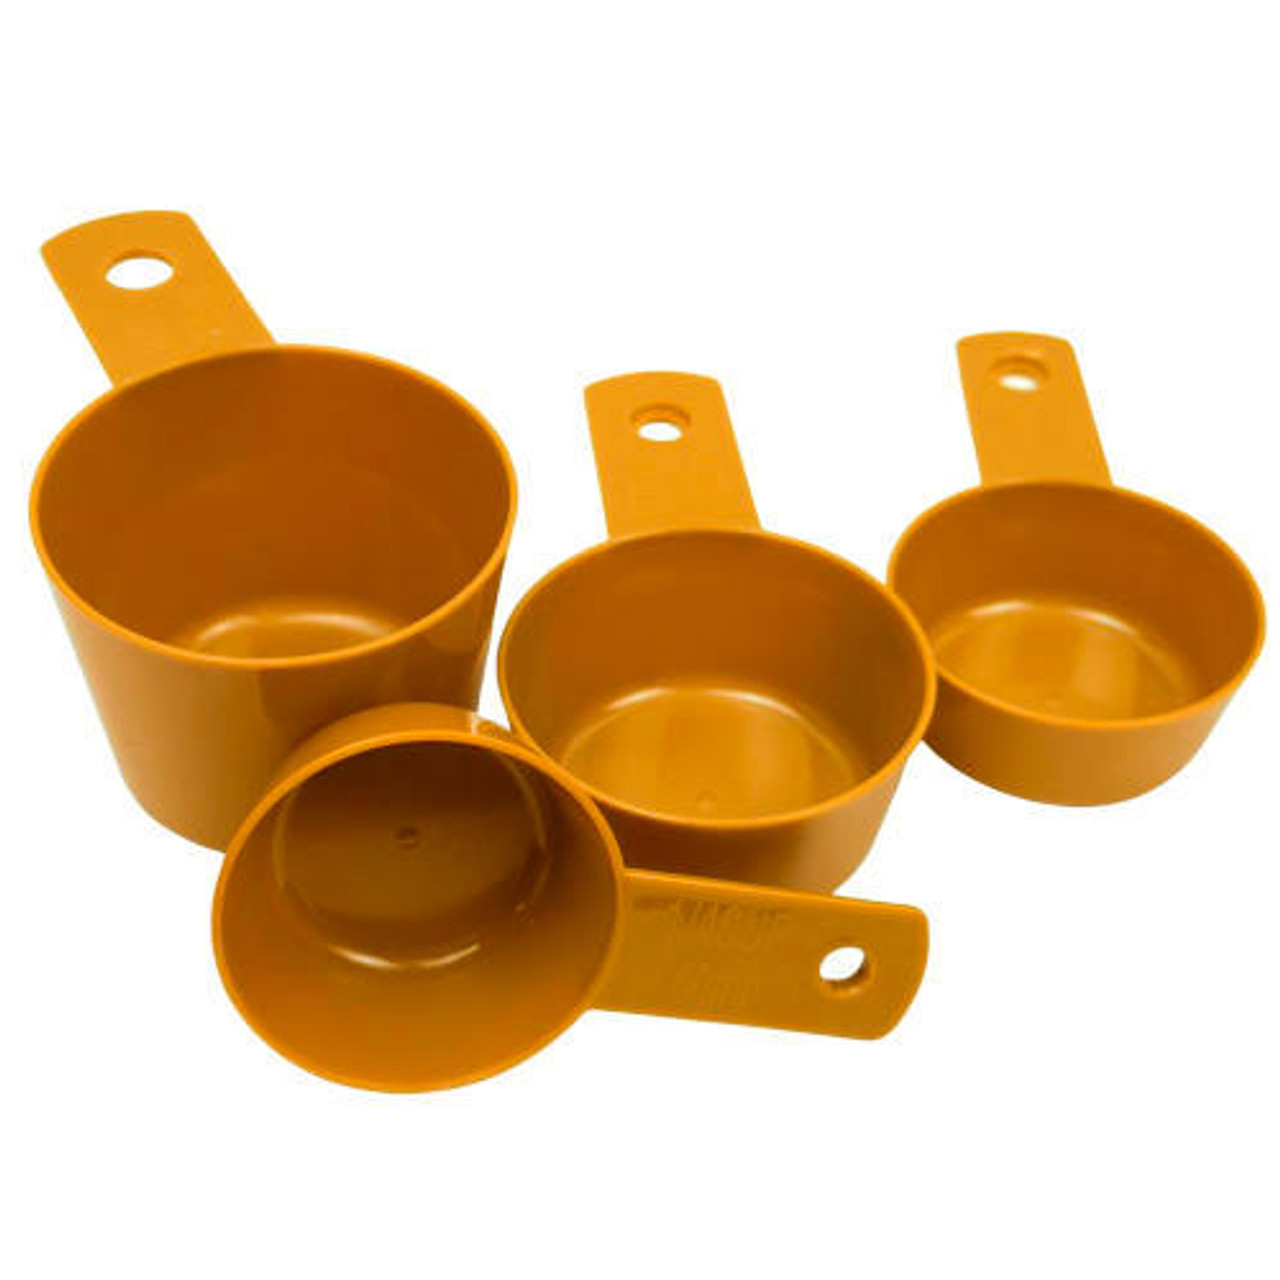 4-Piece Magnetic Measuring Cups – Paderno